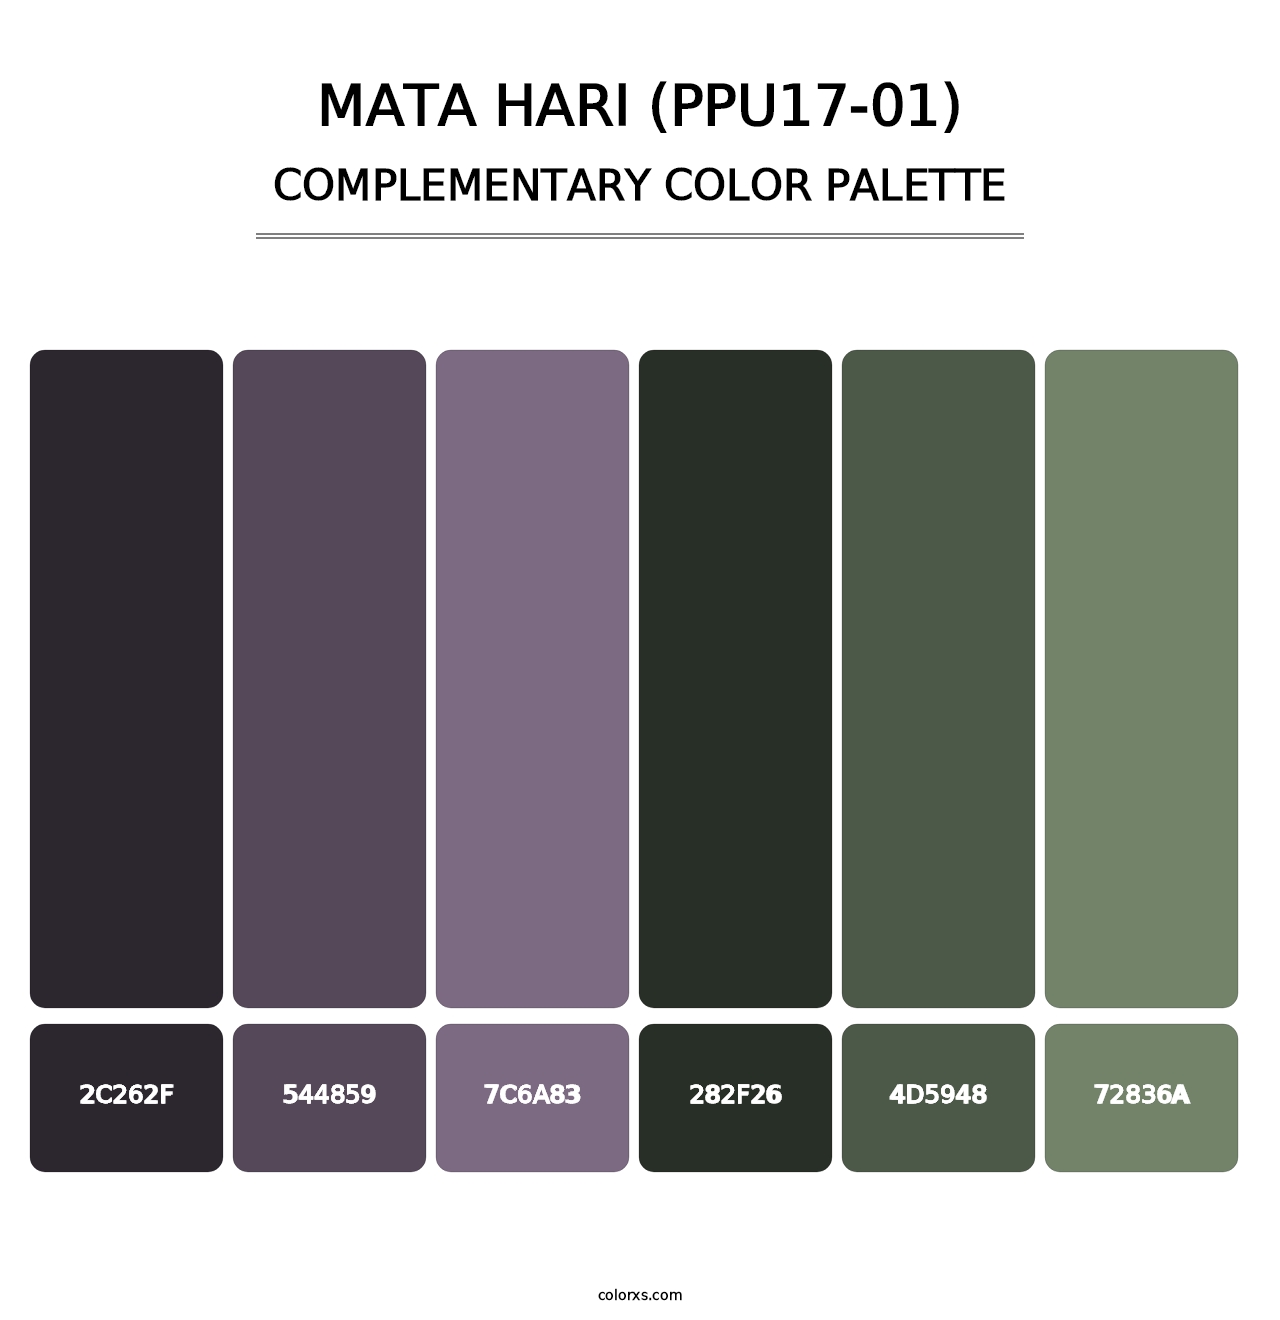 Mata Hari (PPU17-01) - Complementary Color Palette